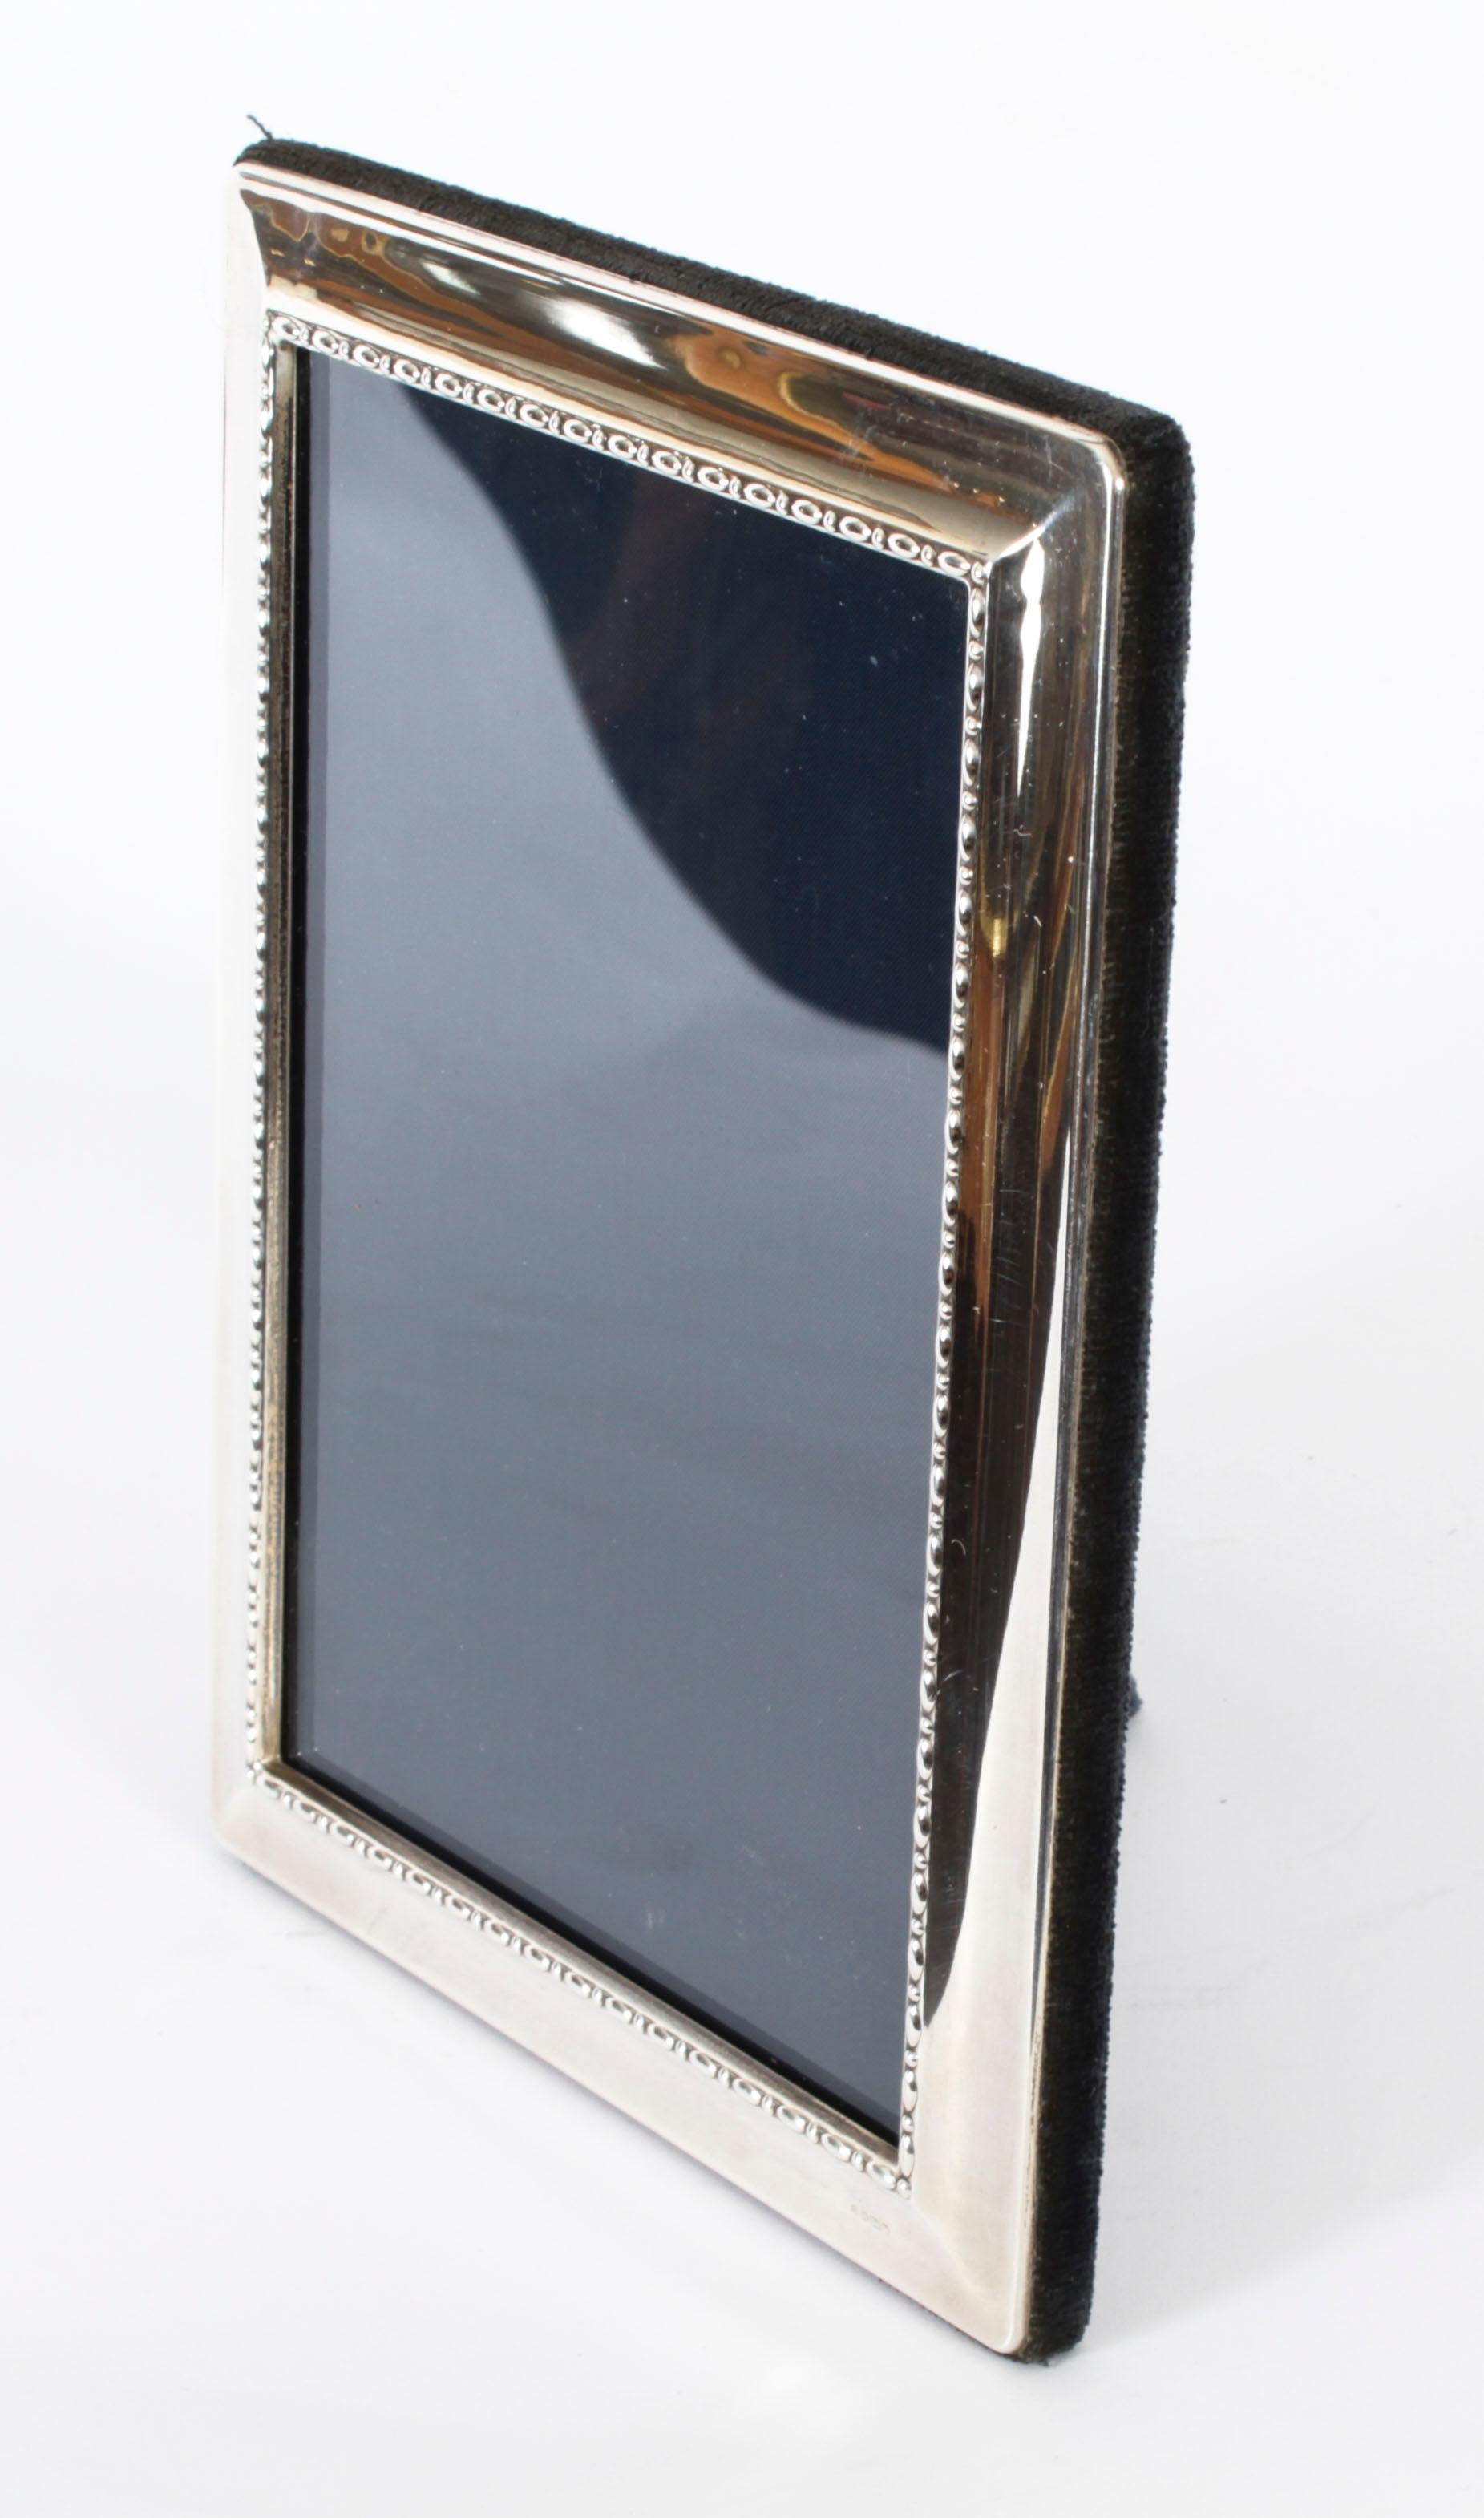 A truly superb petite decorative sterling silver photo frame with makers mark mark RC for Carrs of Sheffield, and halmarks for Sheffield 1995.

This frame can be used portrait or landscape.
 
An excellent gift idea for many occasions or an